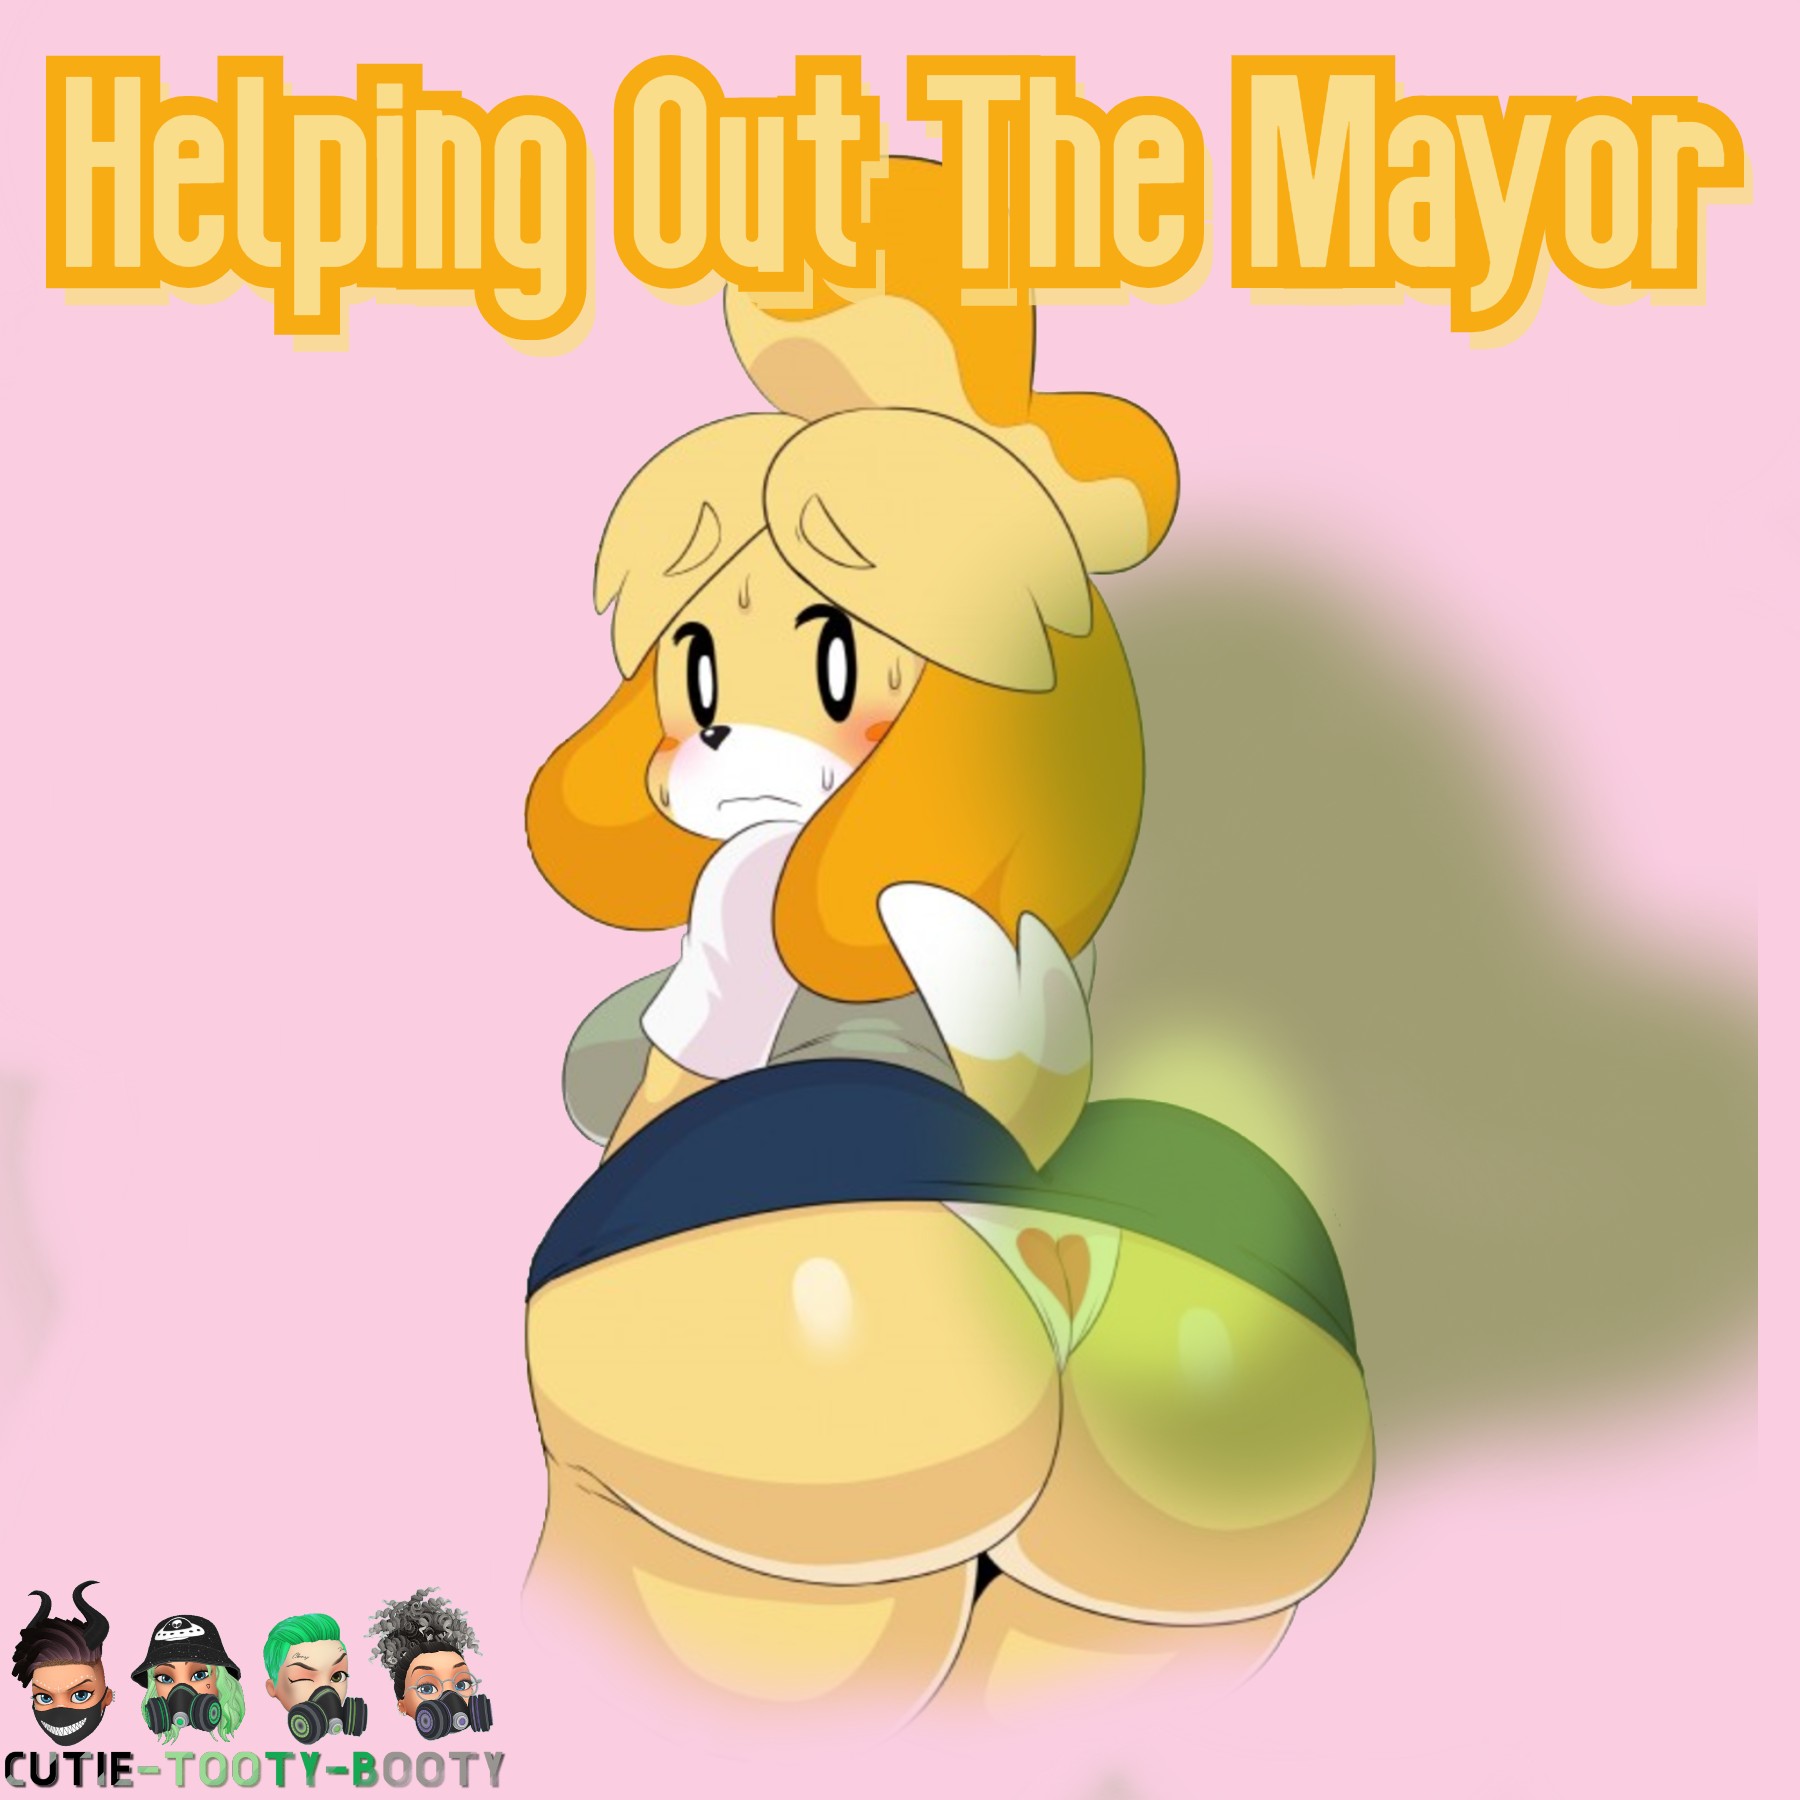 Helping Out the Mayor